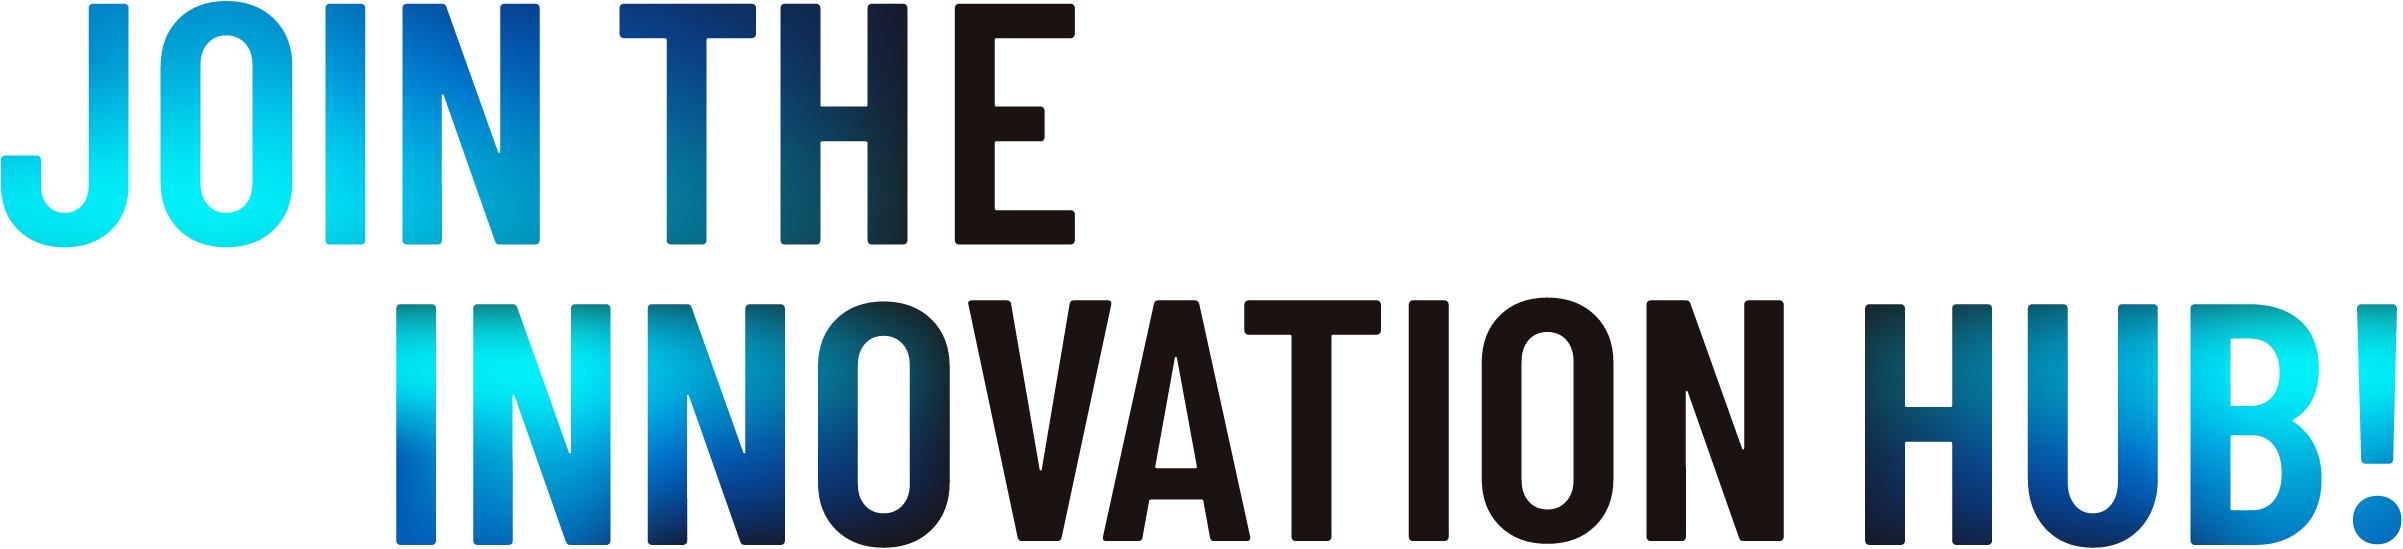 JOIN THE INNOVATION HUB!